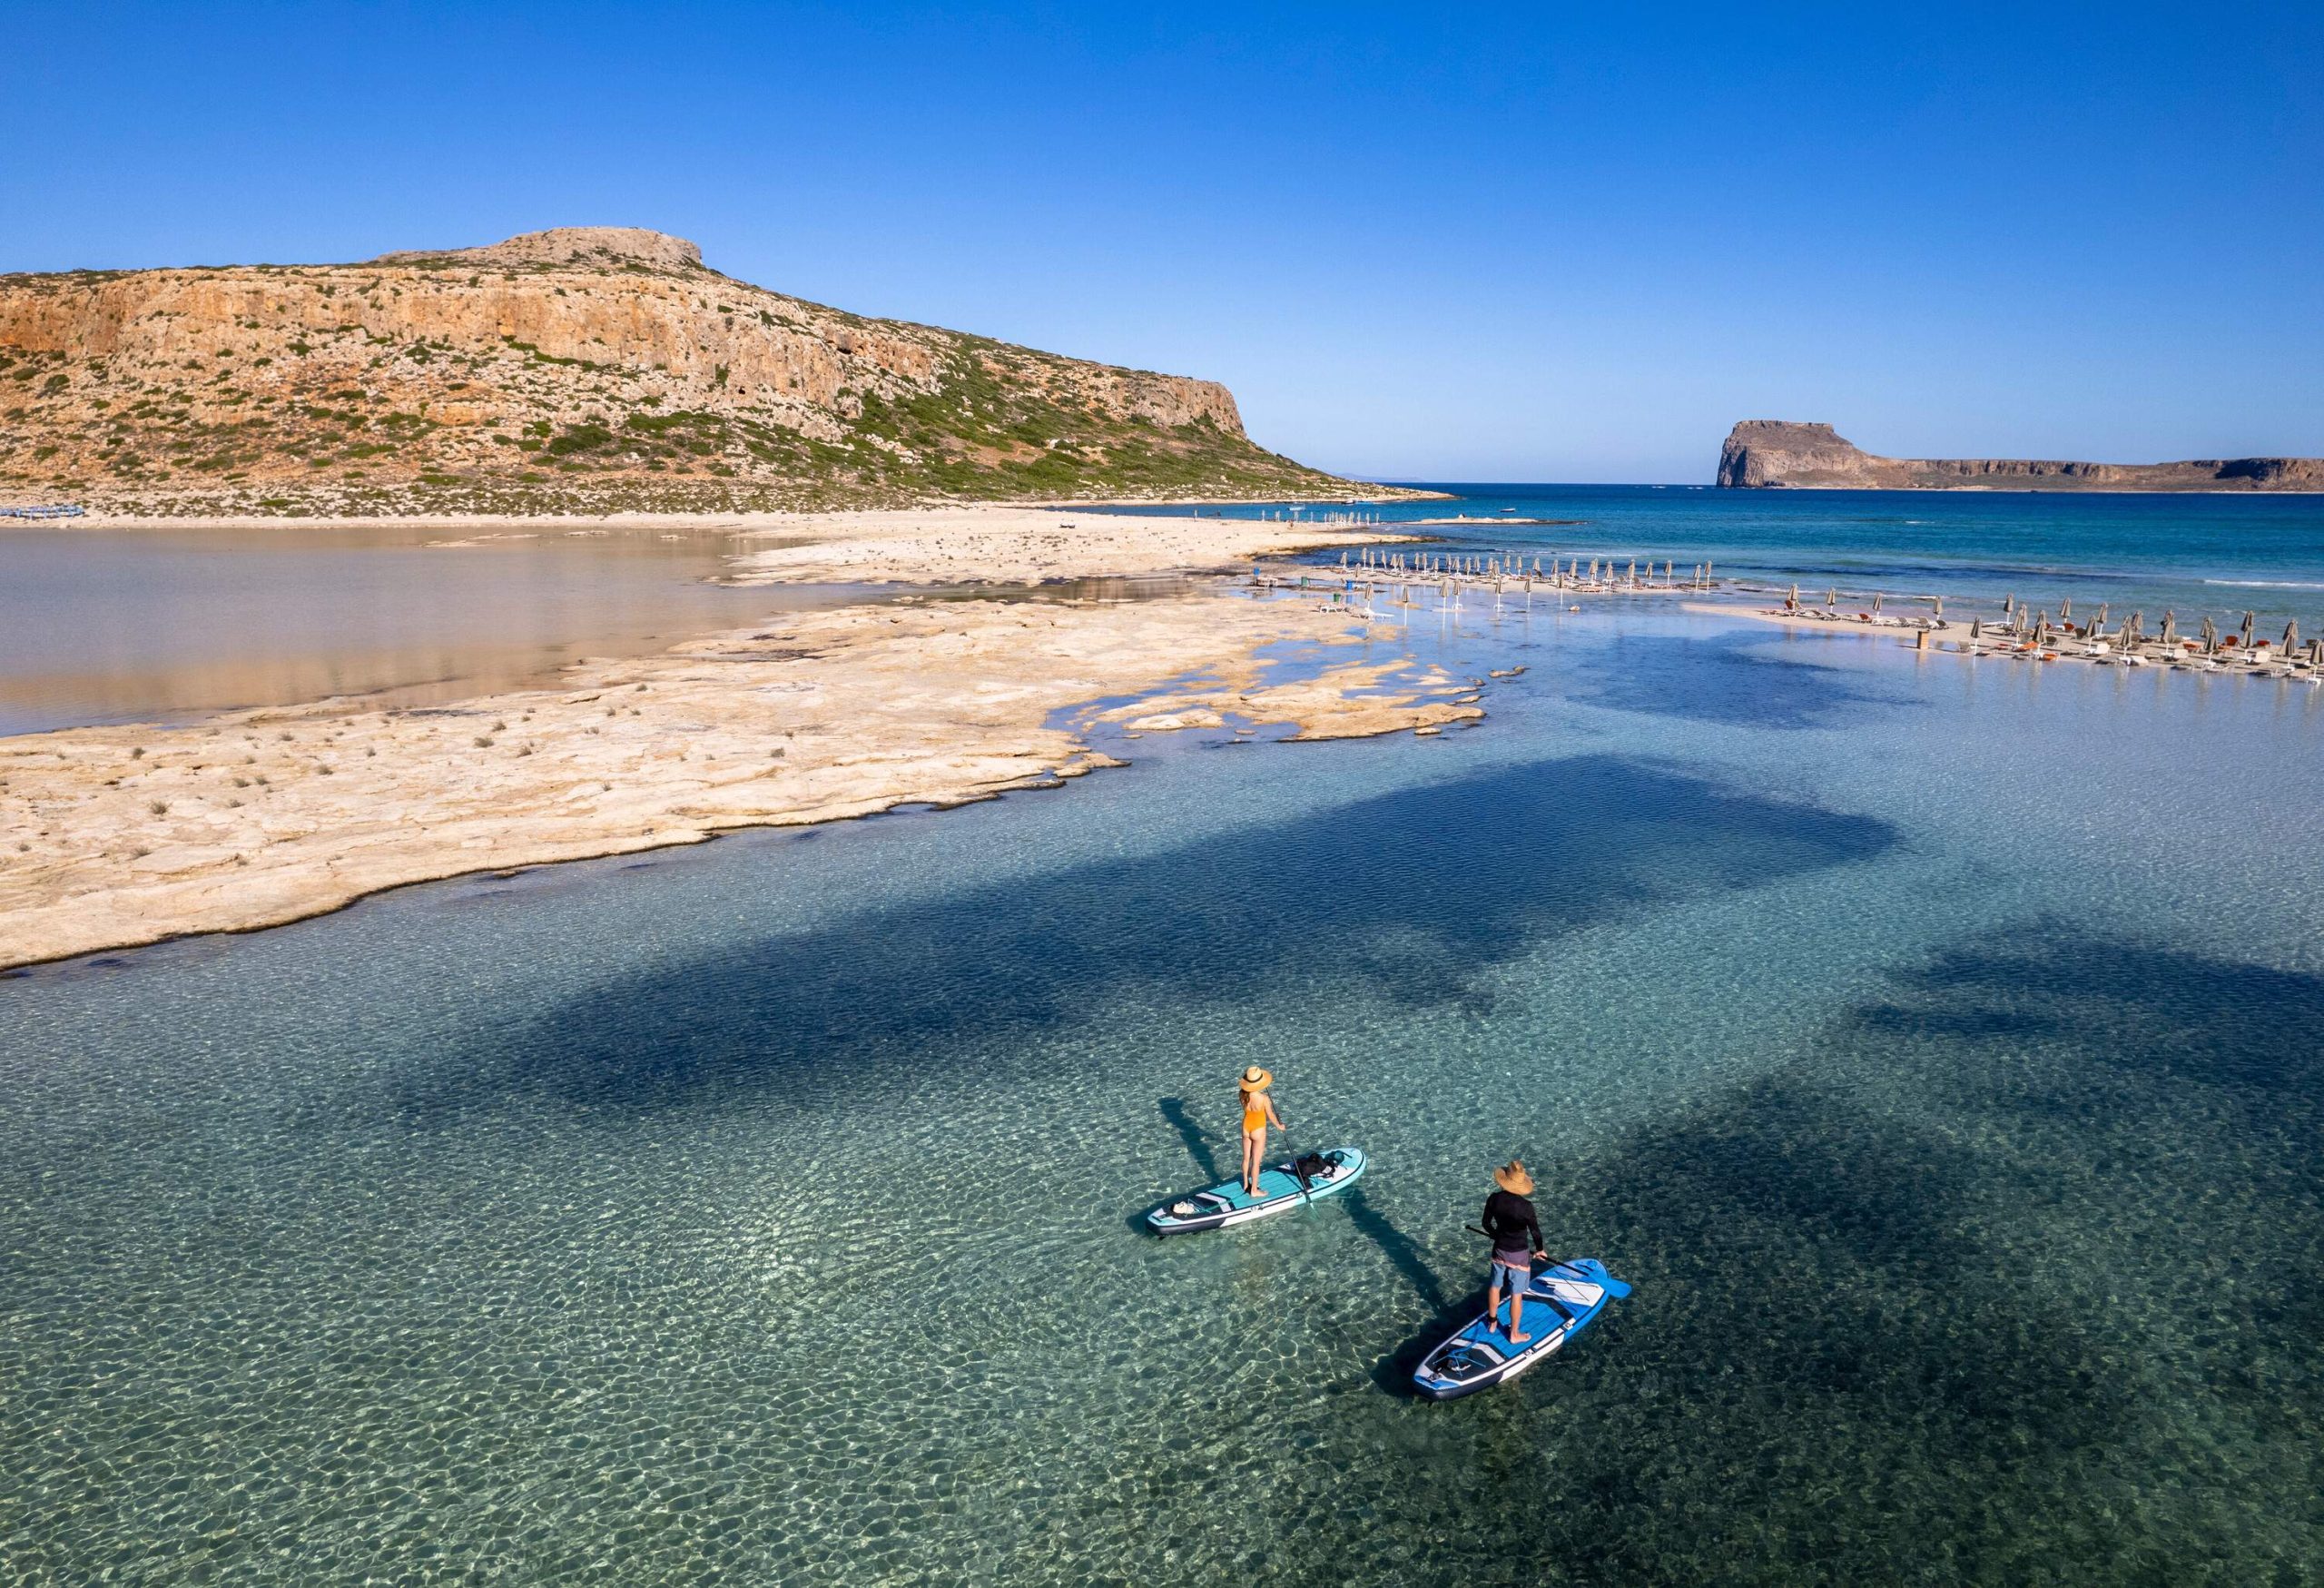 A couple stand-up paddle boarding on shallow calm crystalline waters surrounded by rugged cliffs.